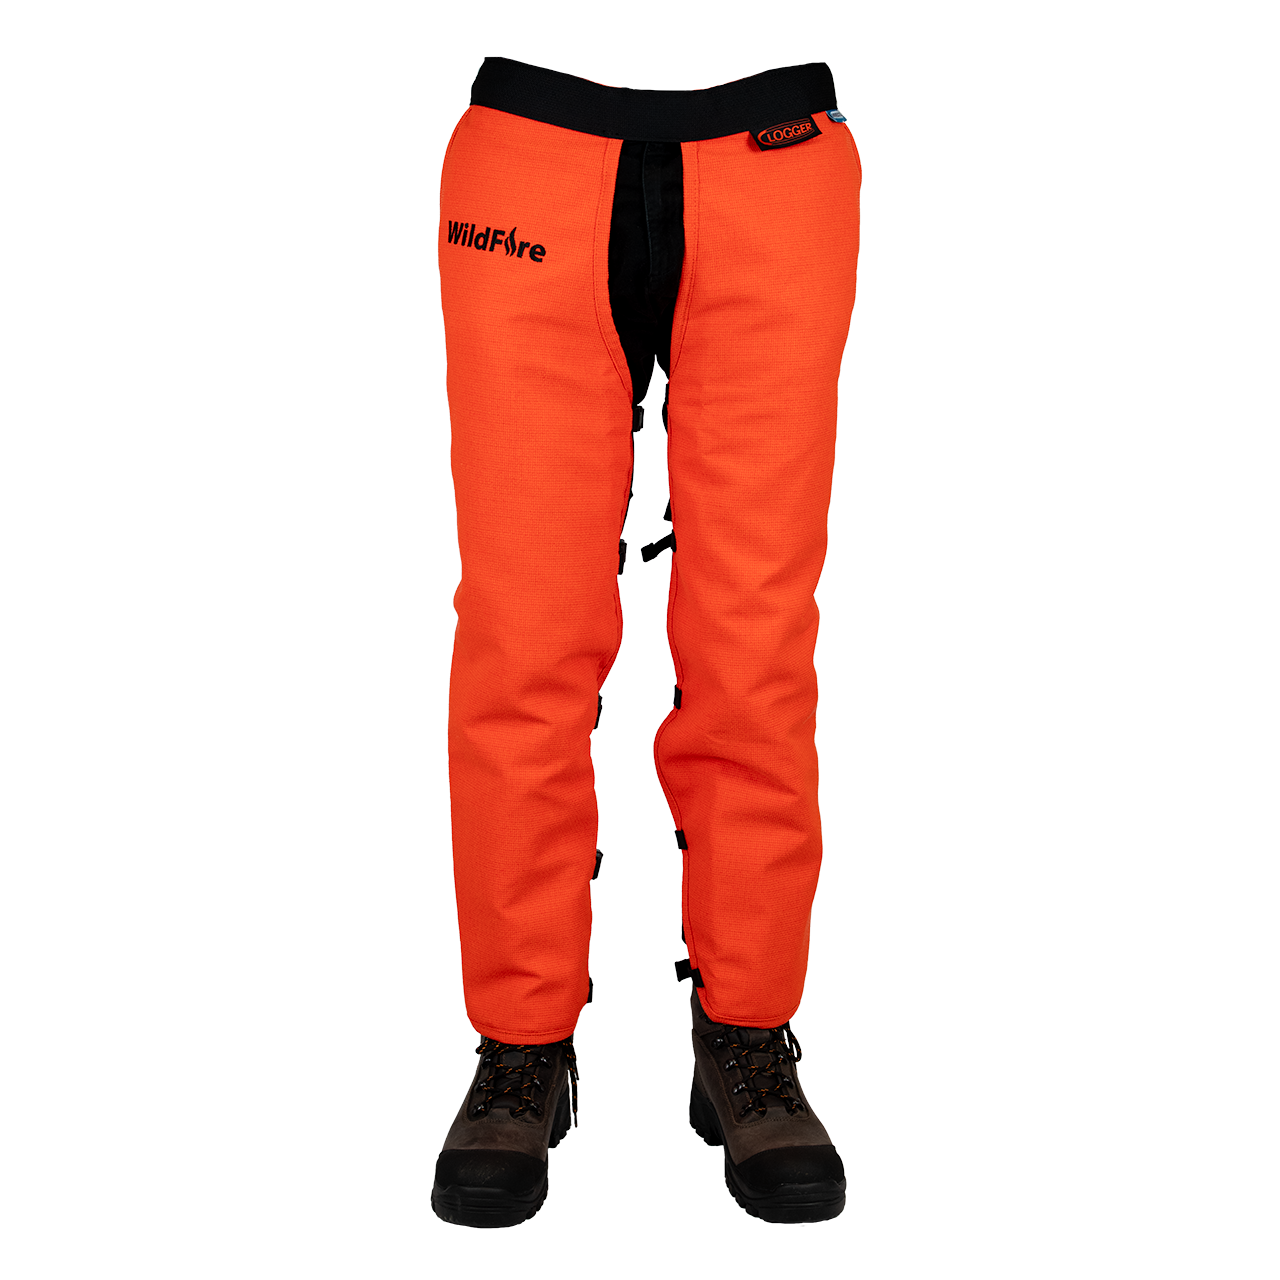 Clogger Wildfire Chainsaw Chaps